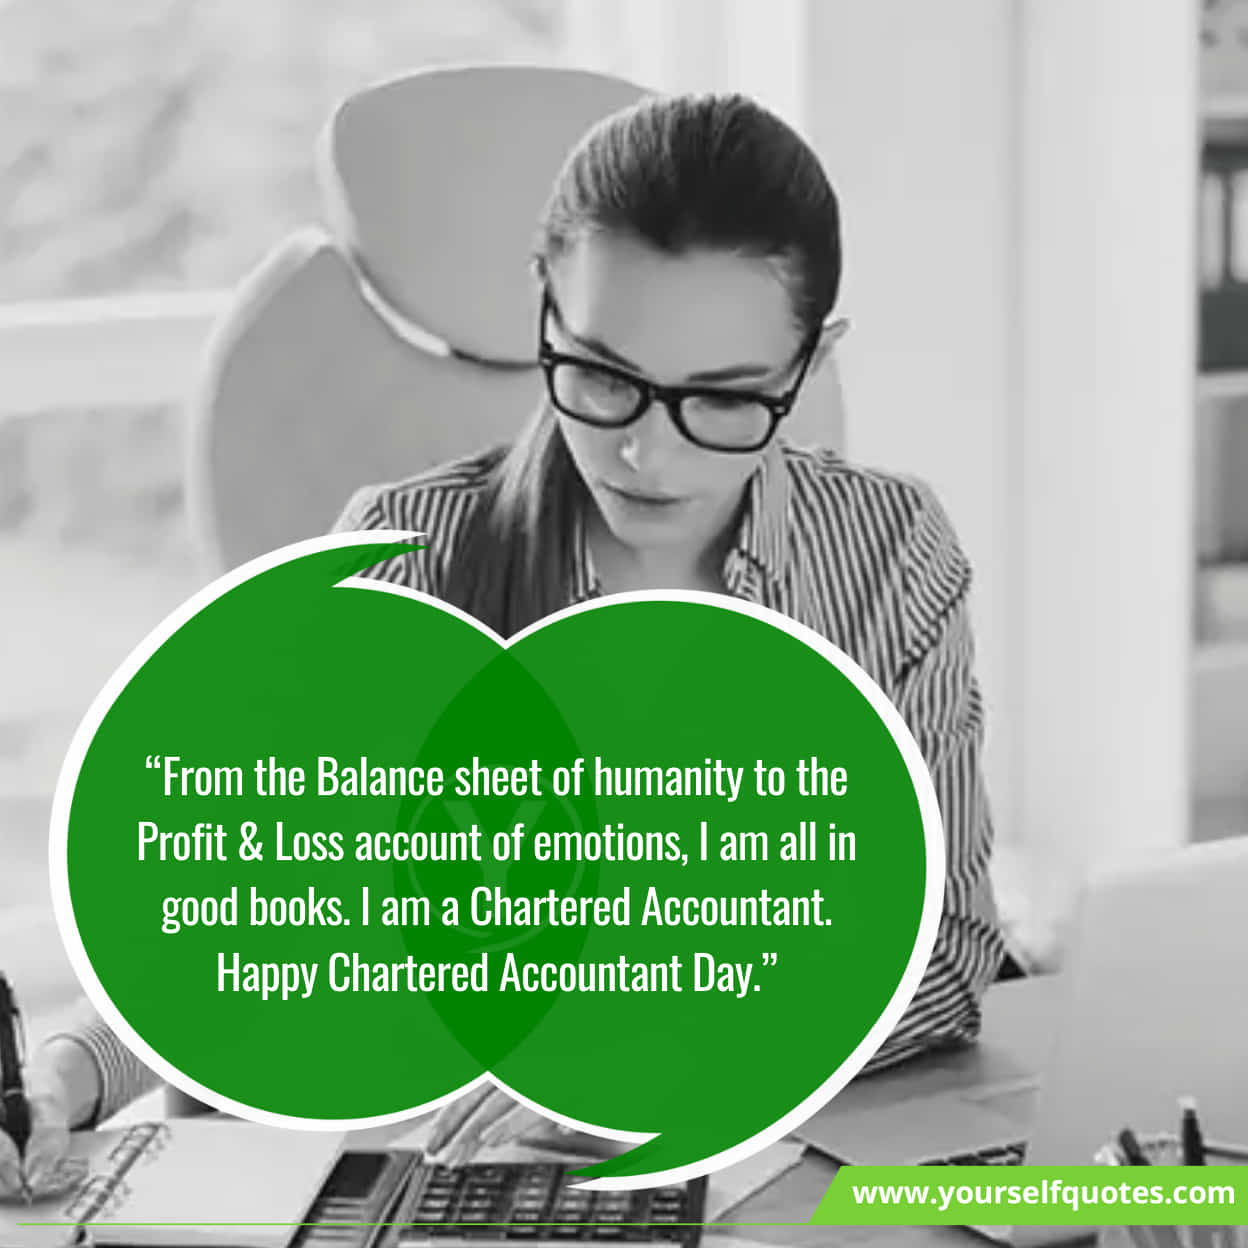 Happy Chartered Accountant Day Wishes Quotes Messages